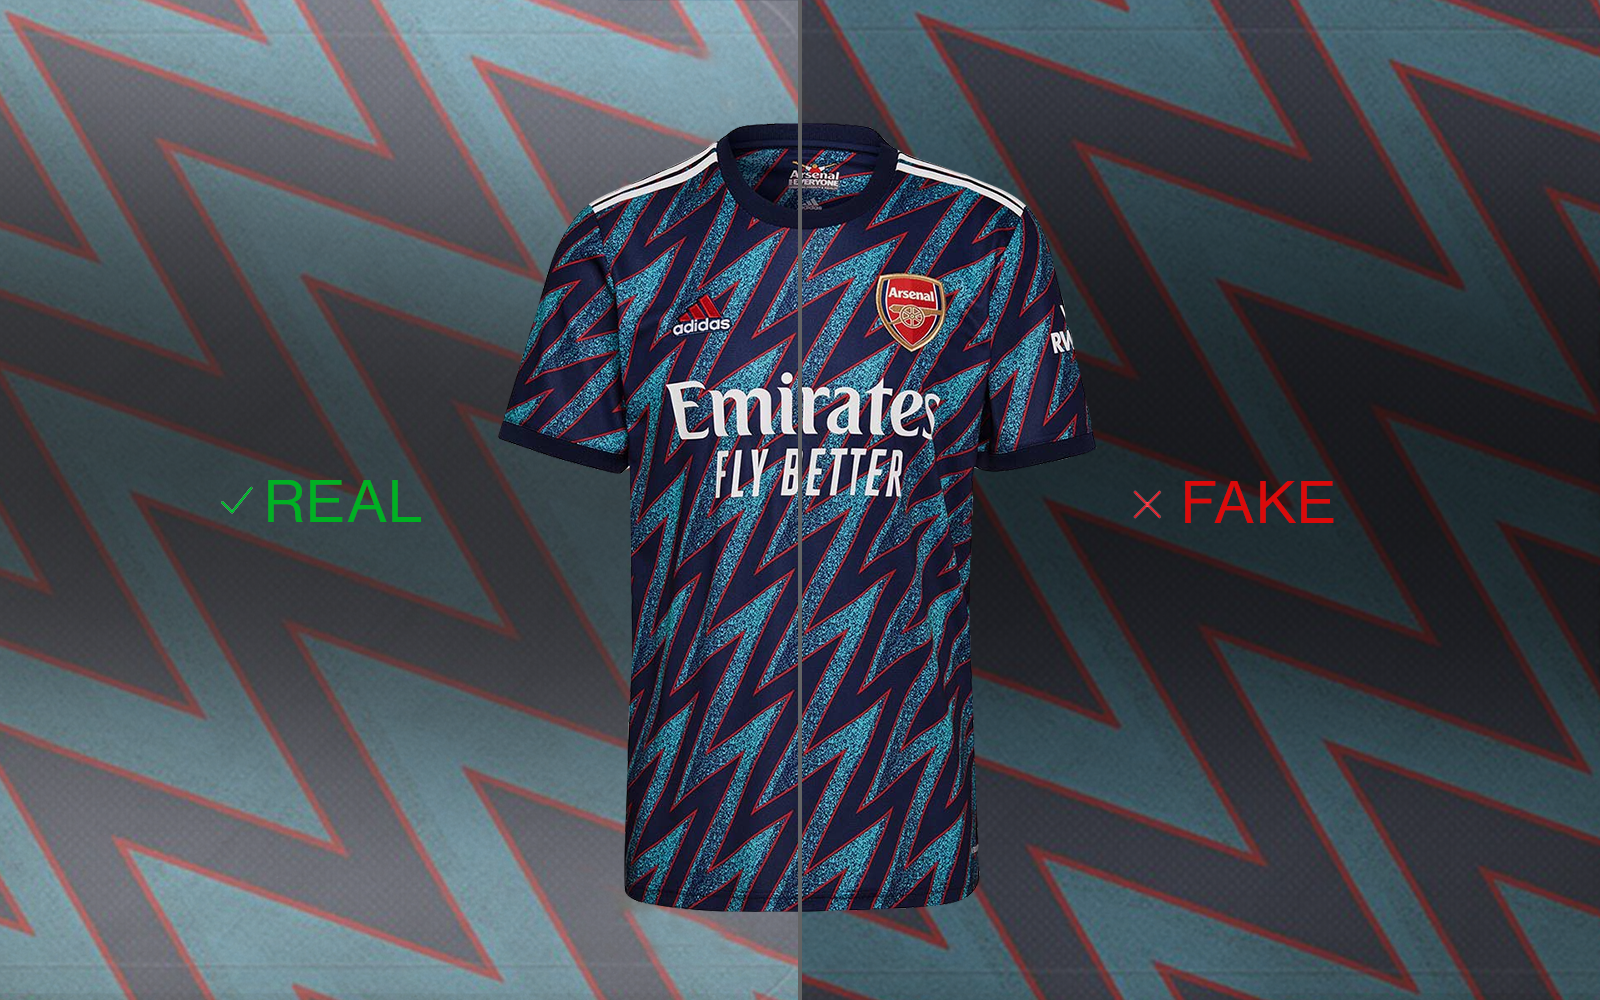 Authentic vs. Replica Jersey Differences & Buying Guide